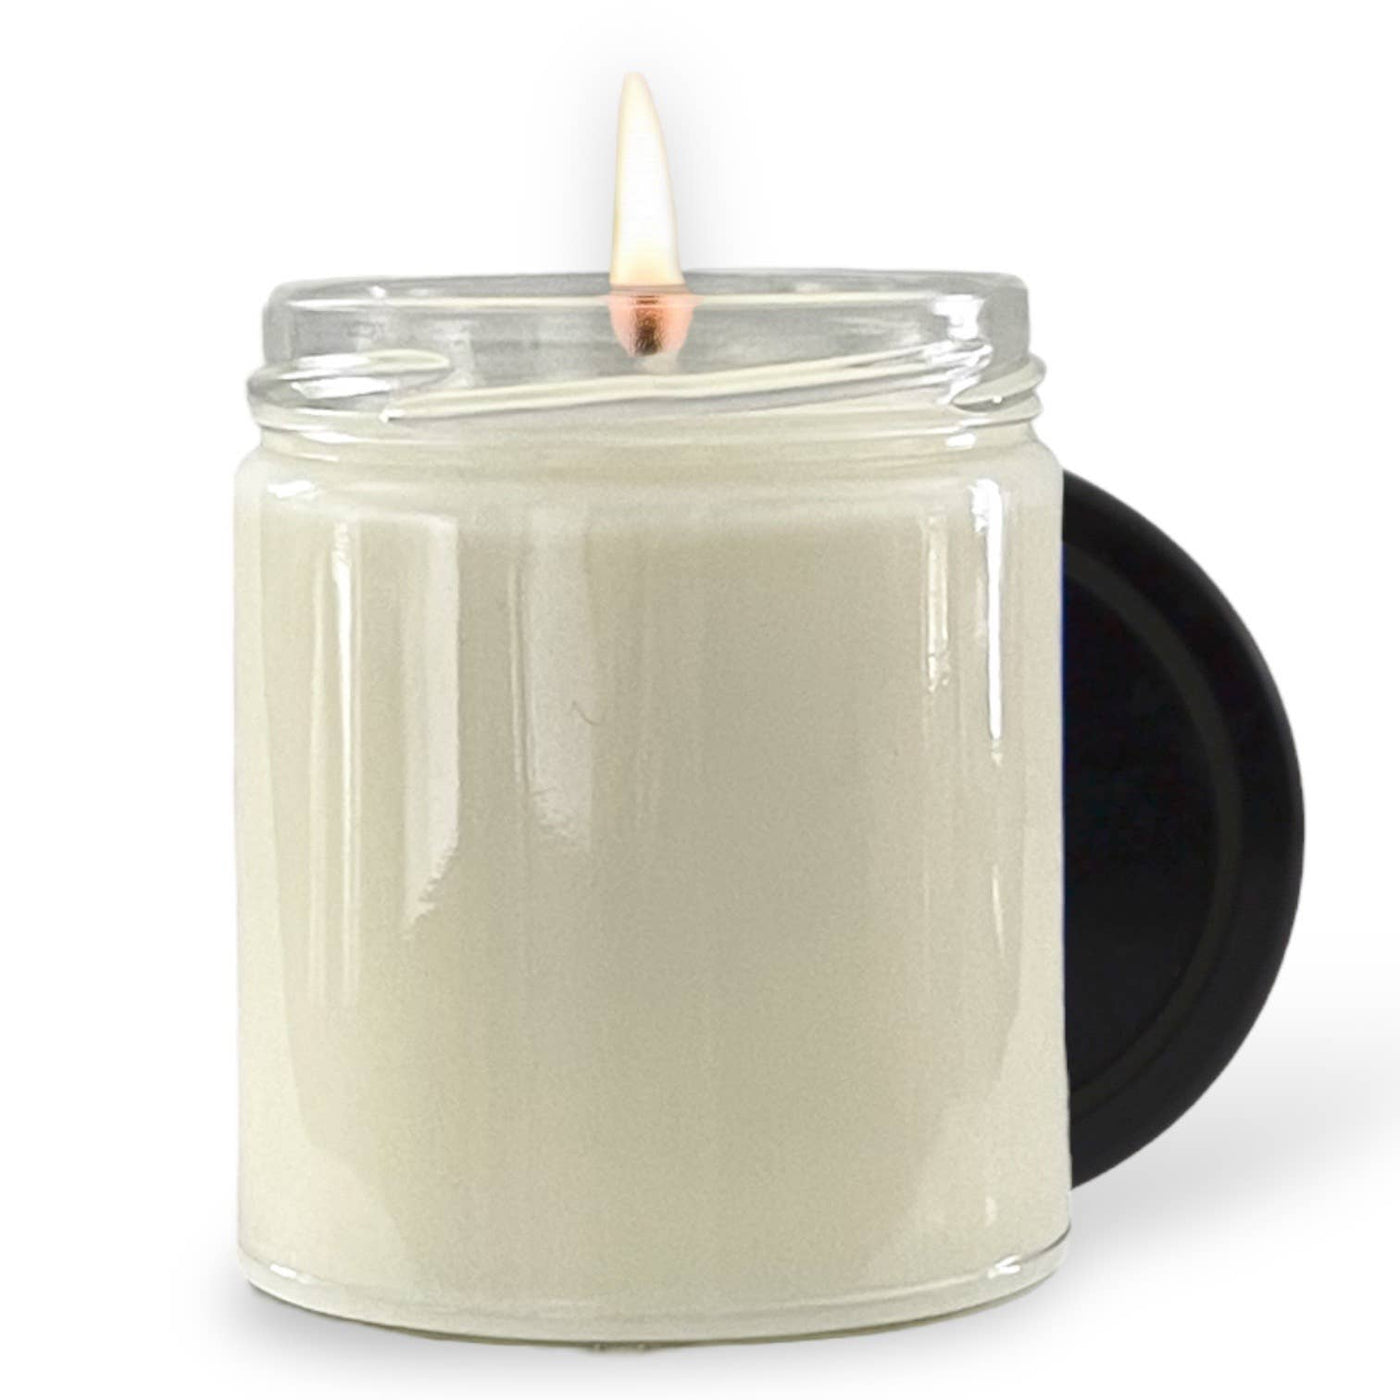 NO LABEL SOY WAX CANDLE - BLACK LID: 8 oz Single Wick / Bloom